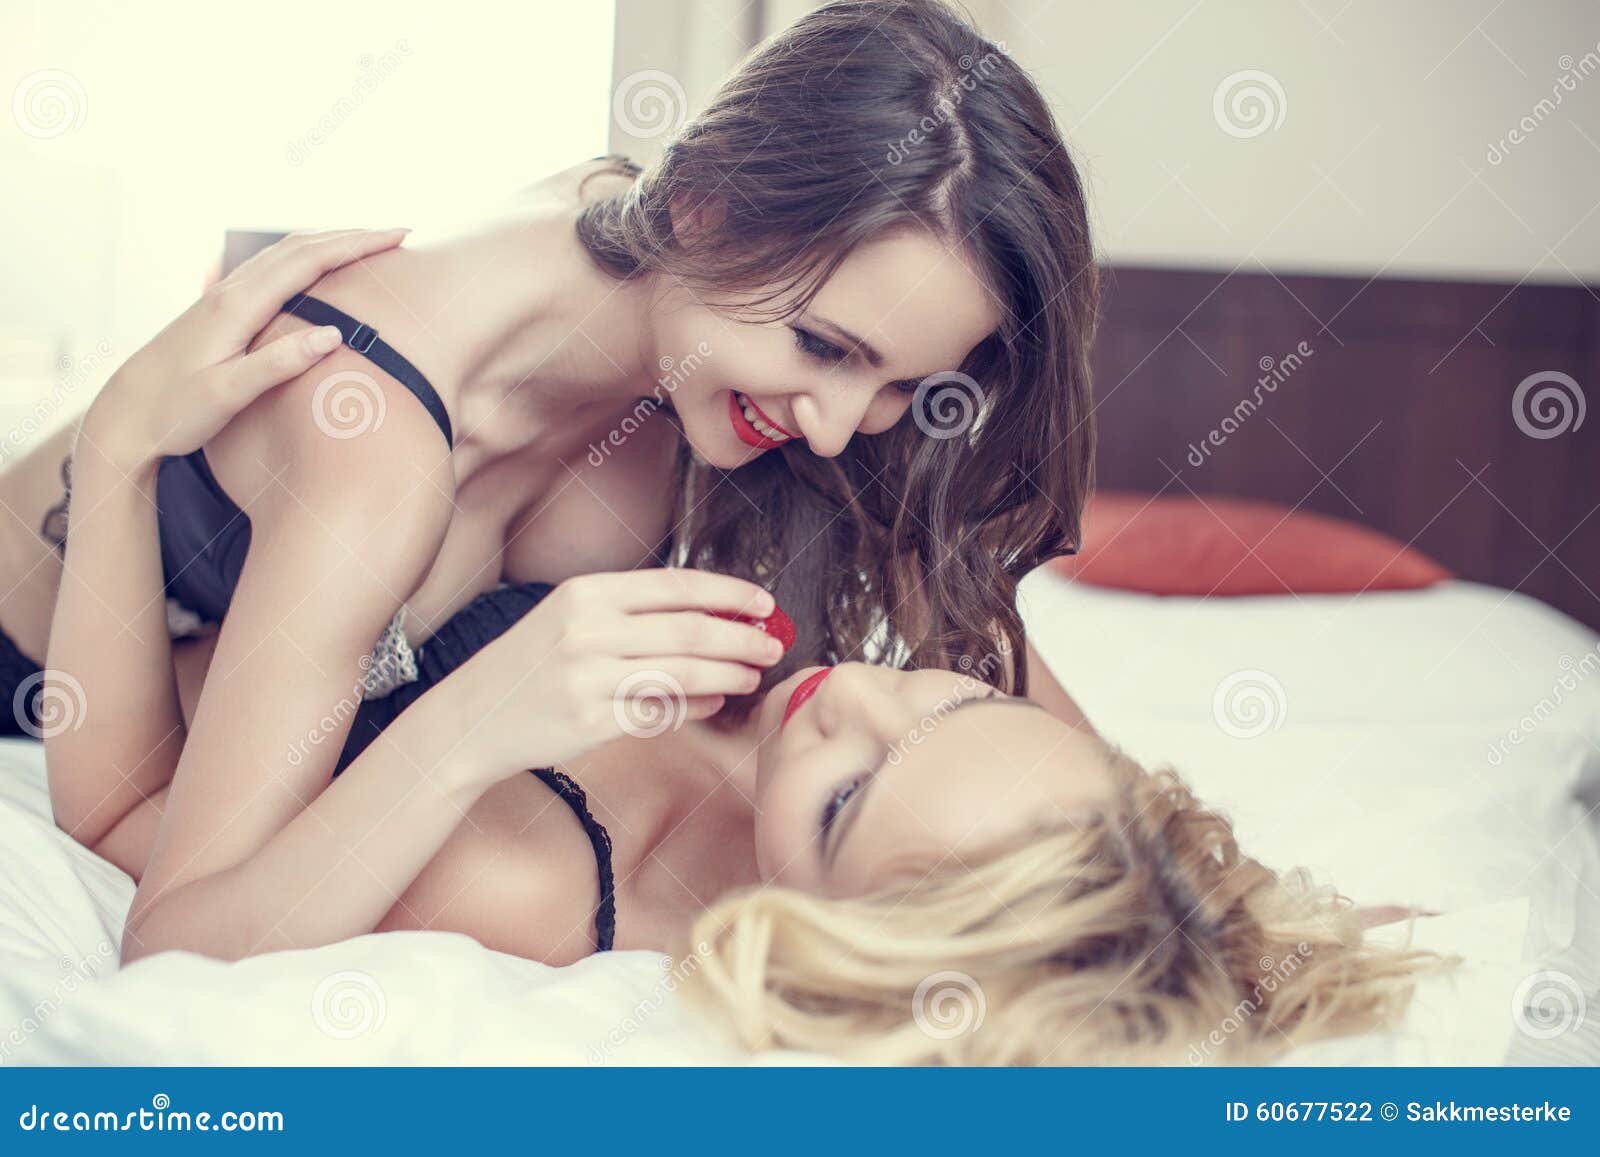 Lesbian Foreplay